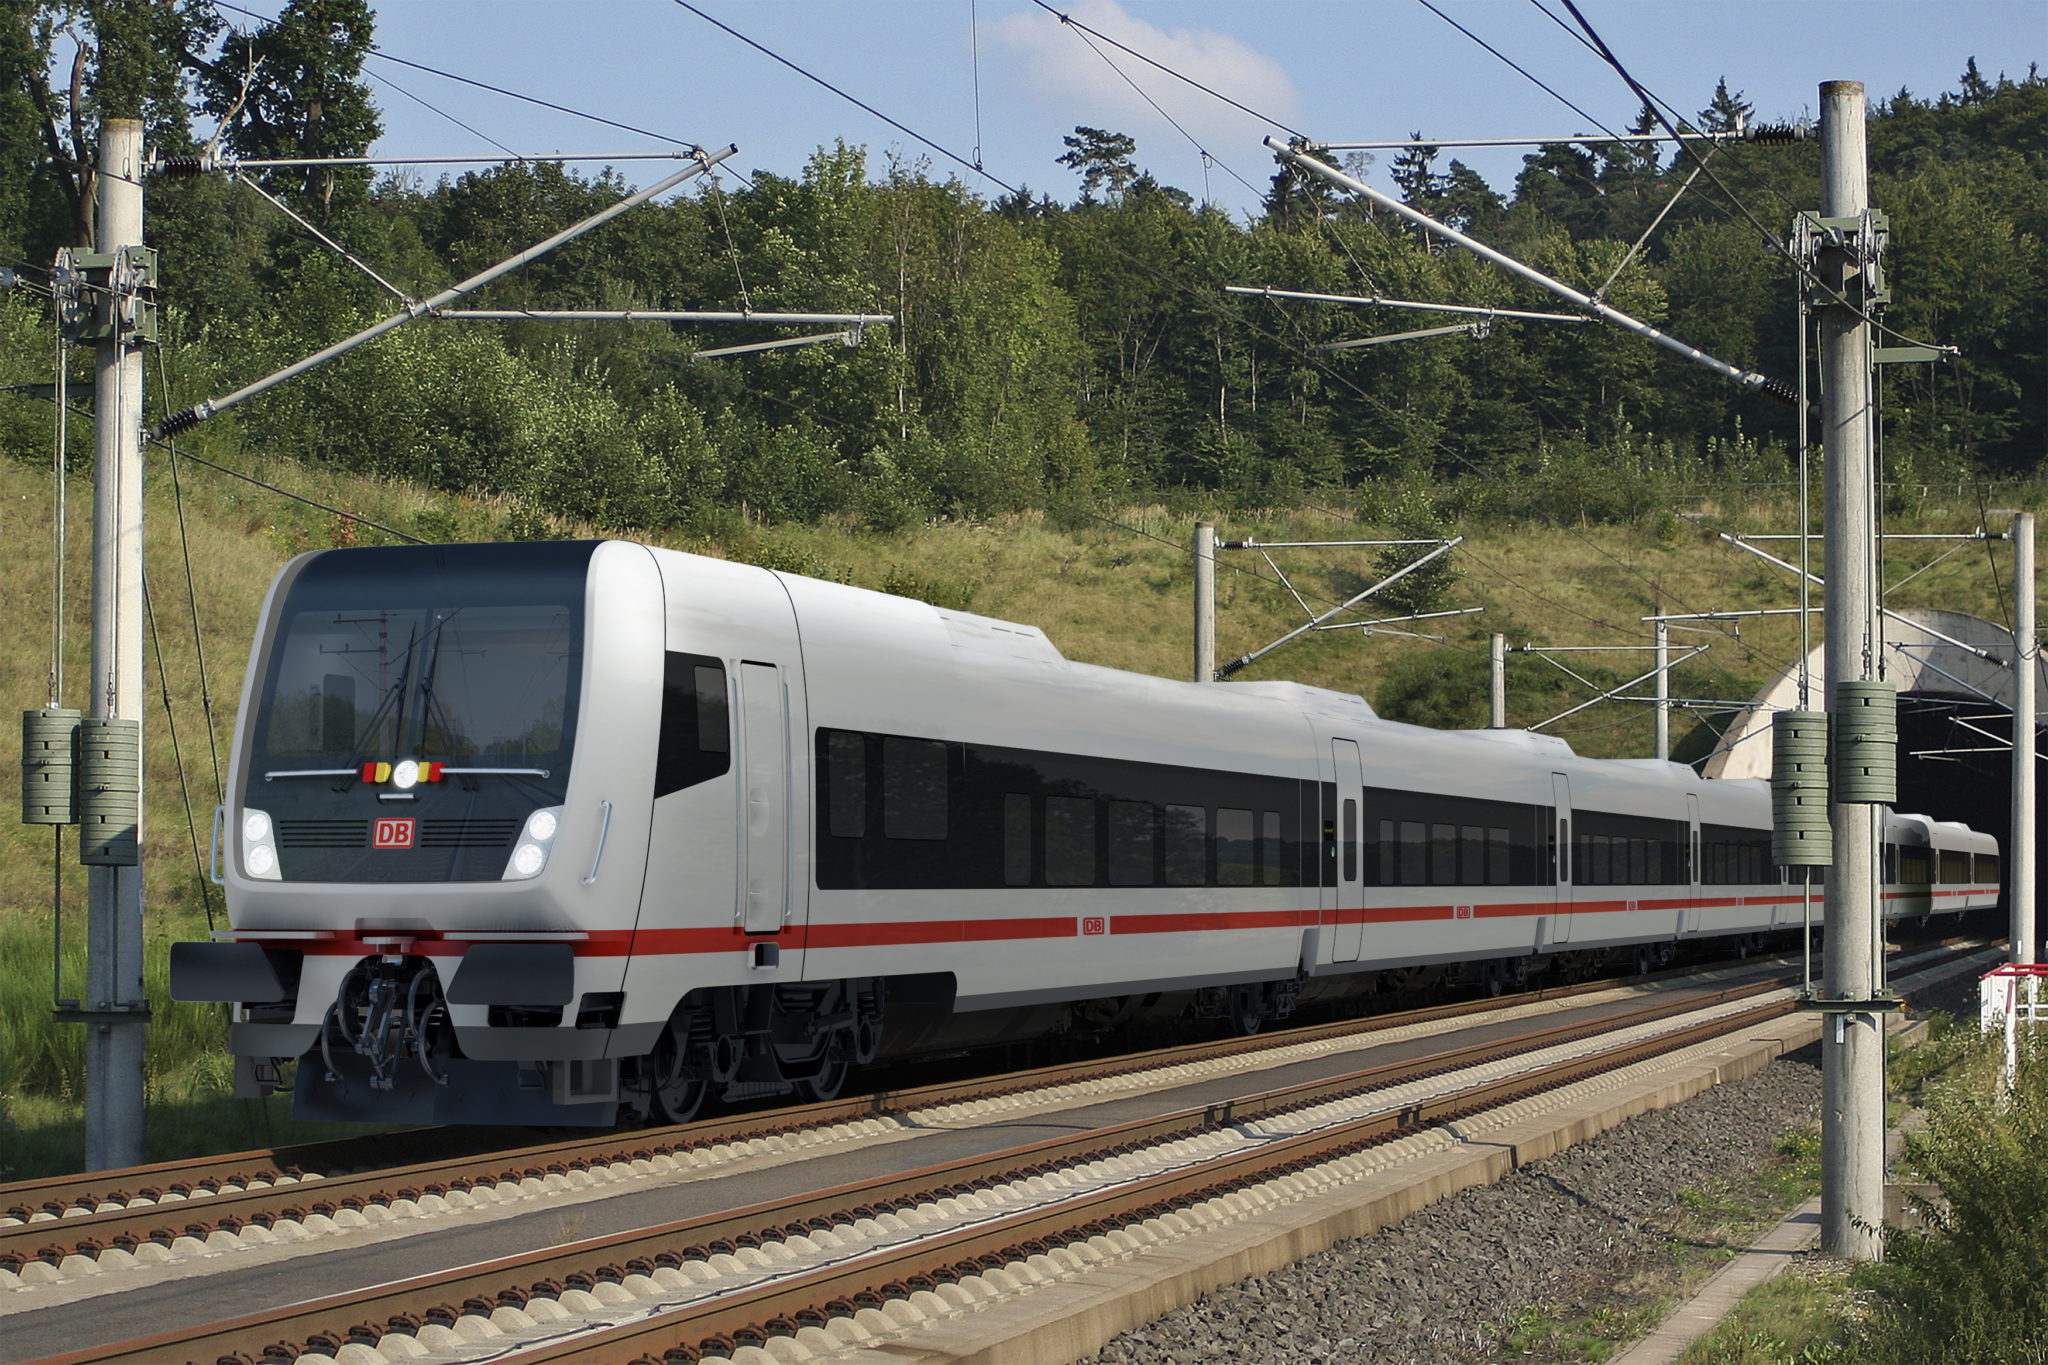 The ECx will run on the Amsterdam-Berlin rail link from 2023